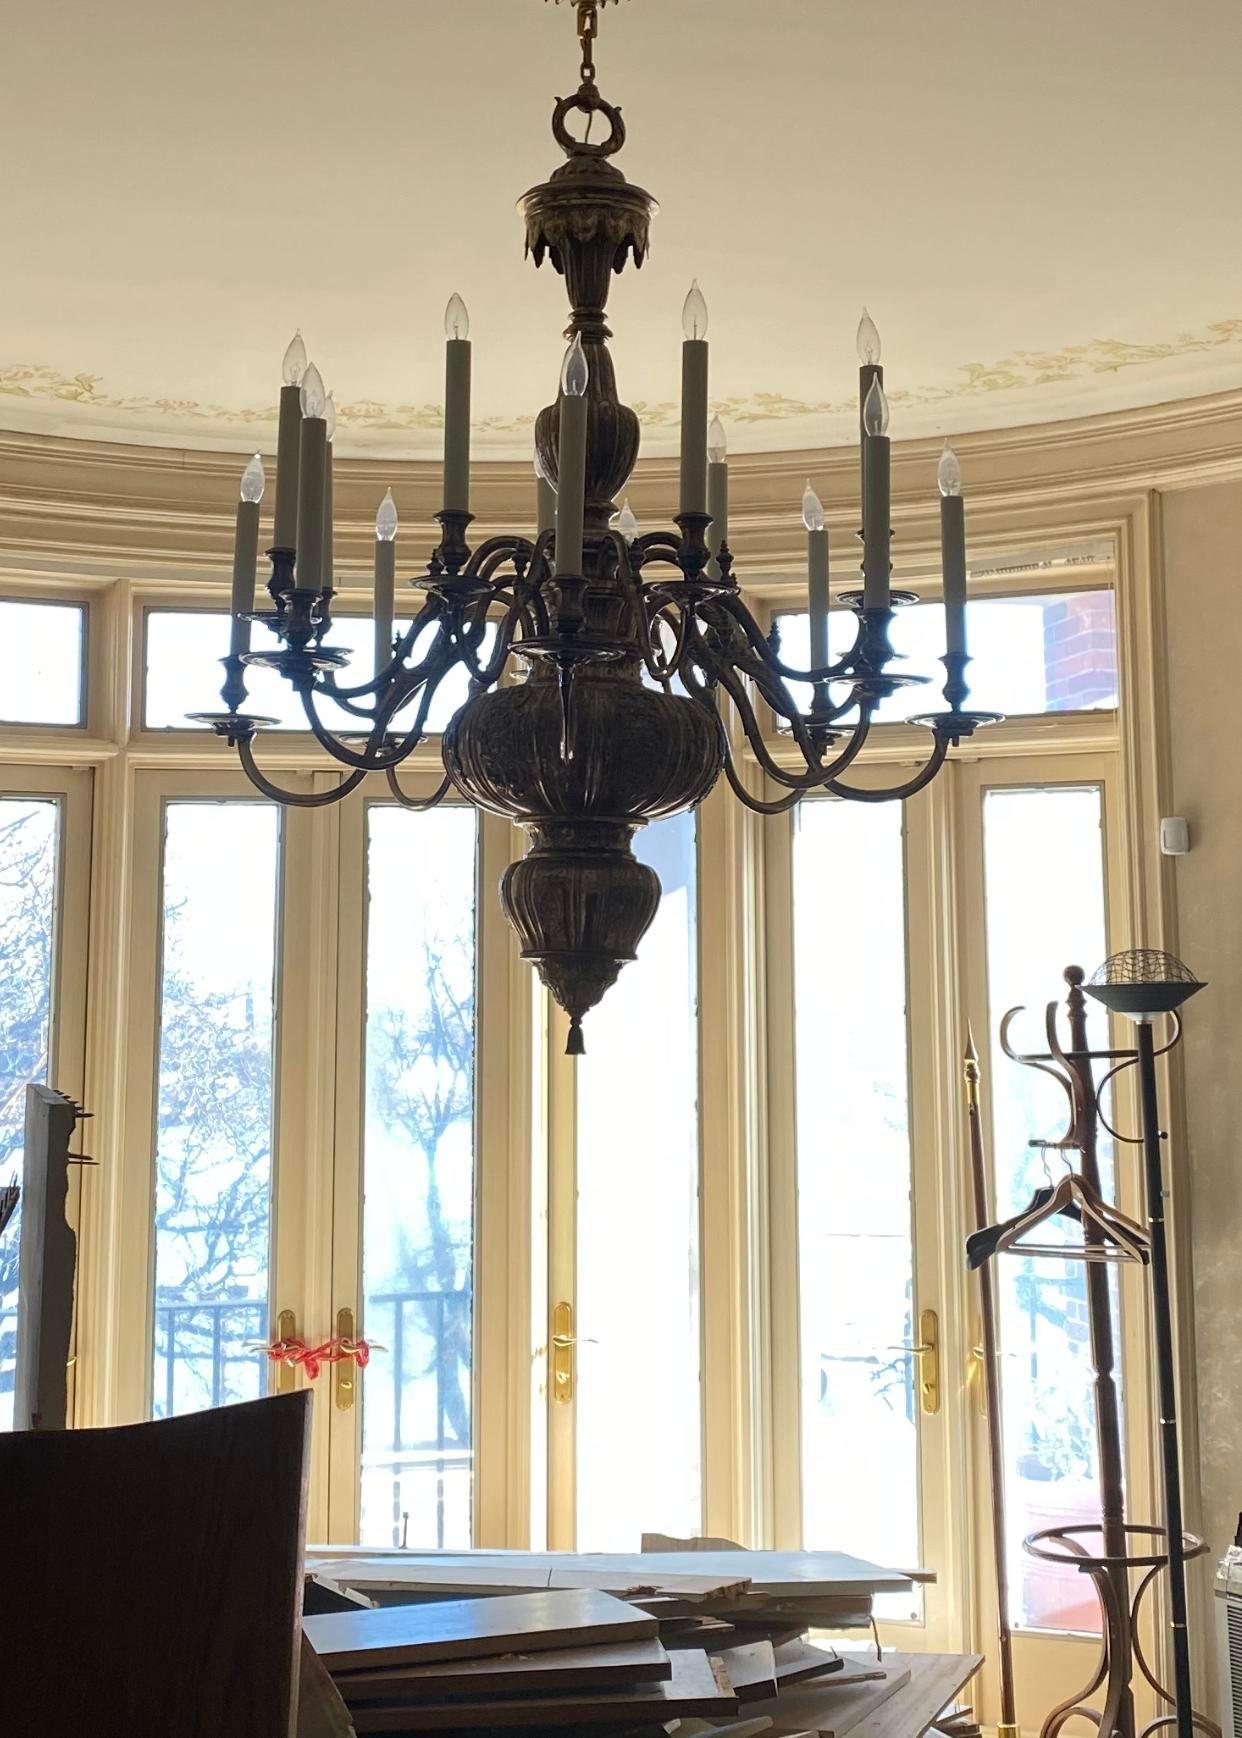 A Caldwell, silver plated 16 light chandelier from a very prominent state in NYC with a beautiful neoclassic design on body, circa 1900s. In very good vintage condition.

Dealer: G302YP
 